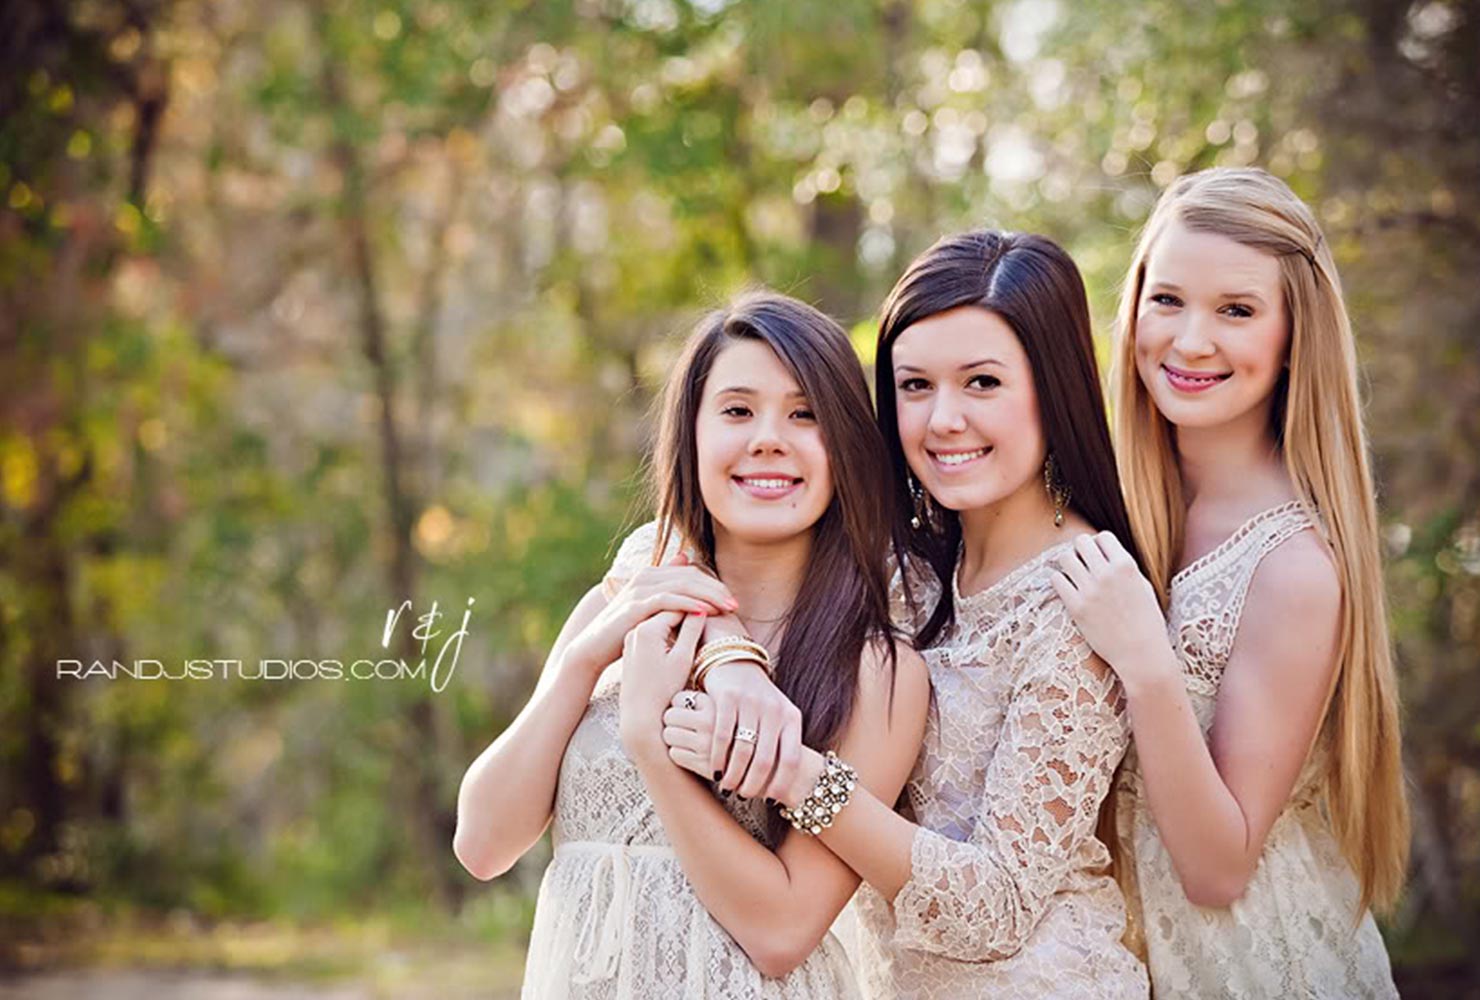 sibling photo ideas sisters matching white